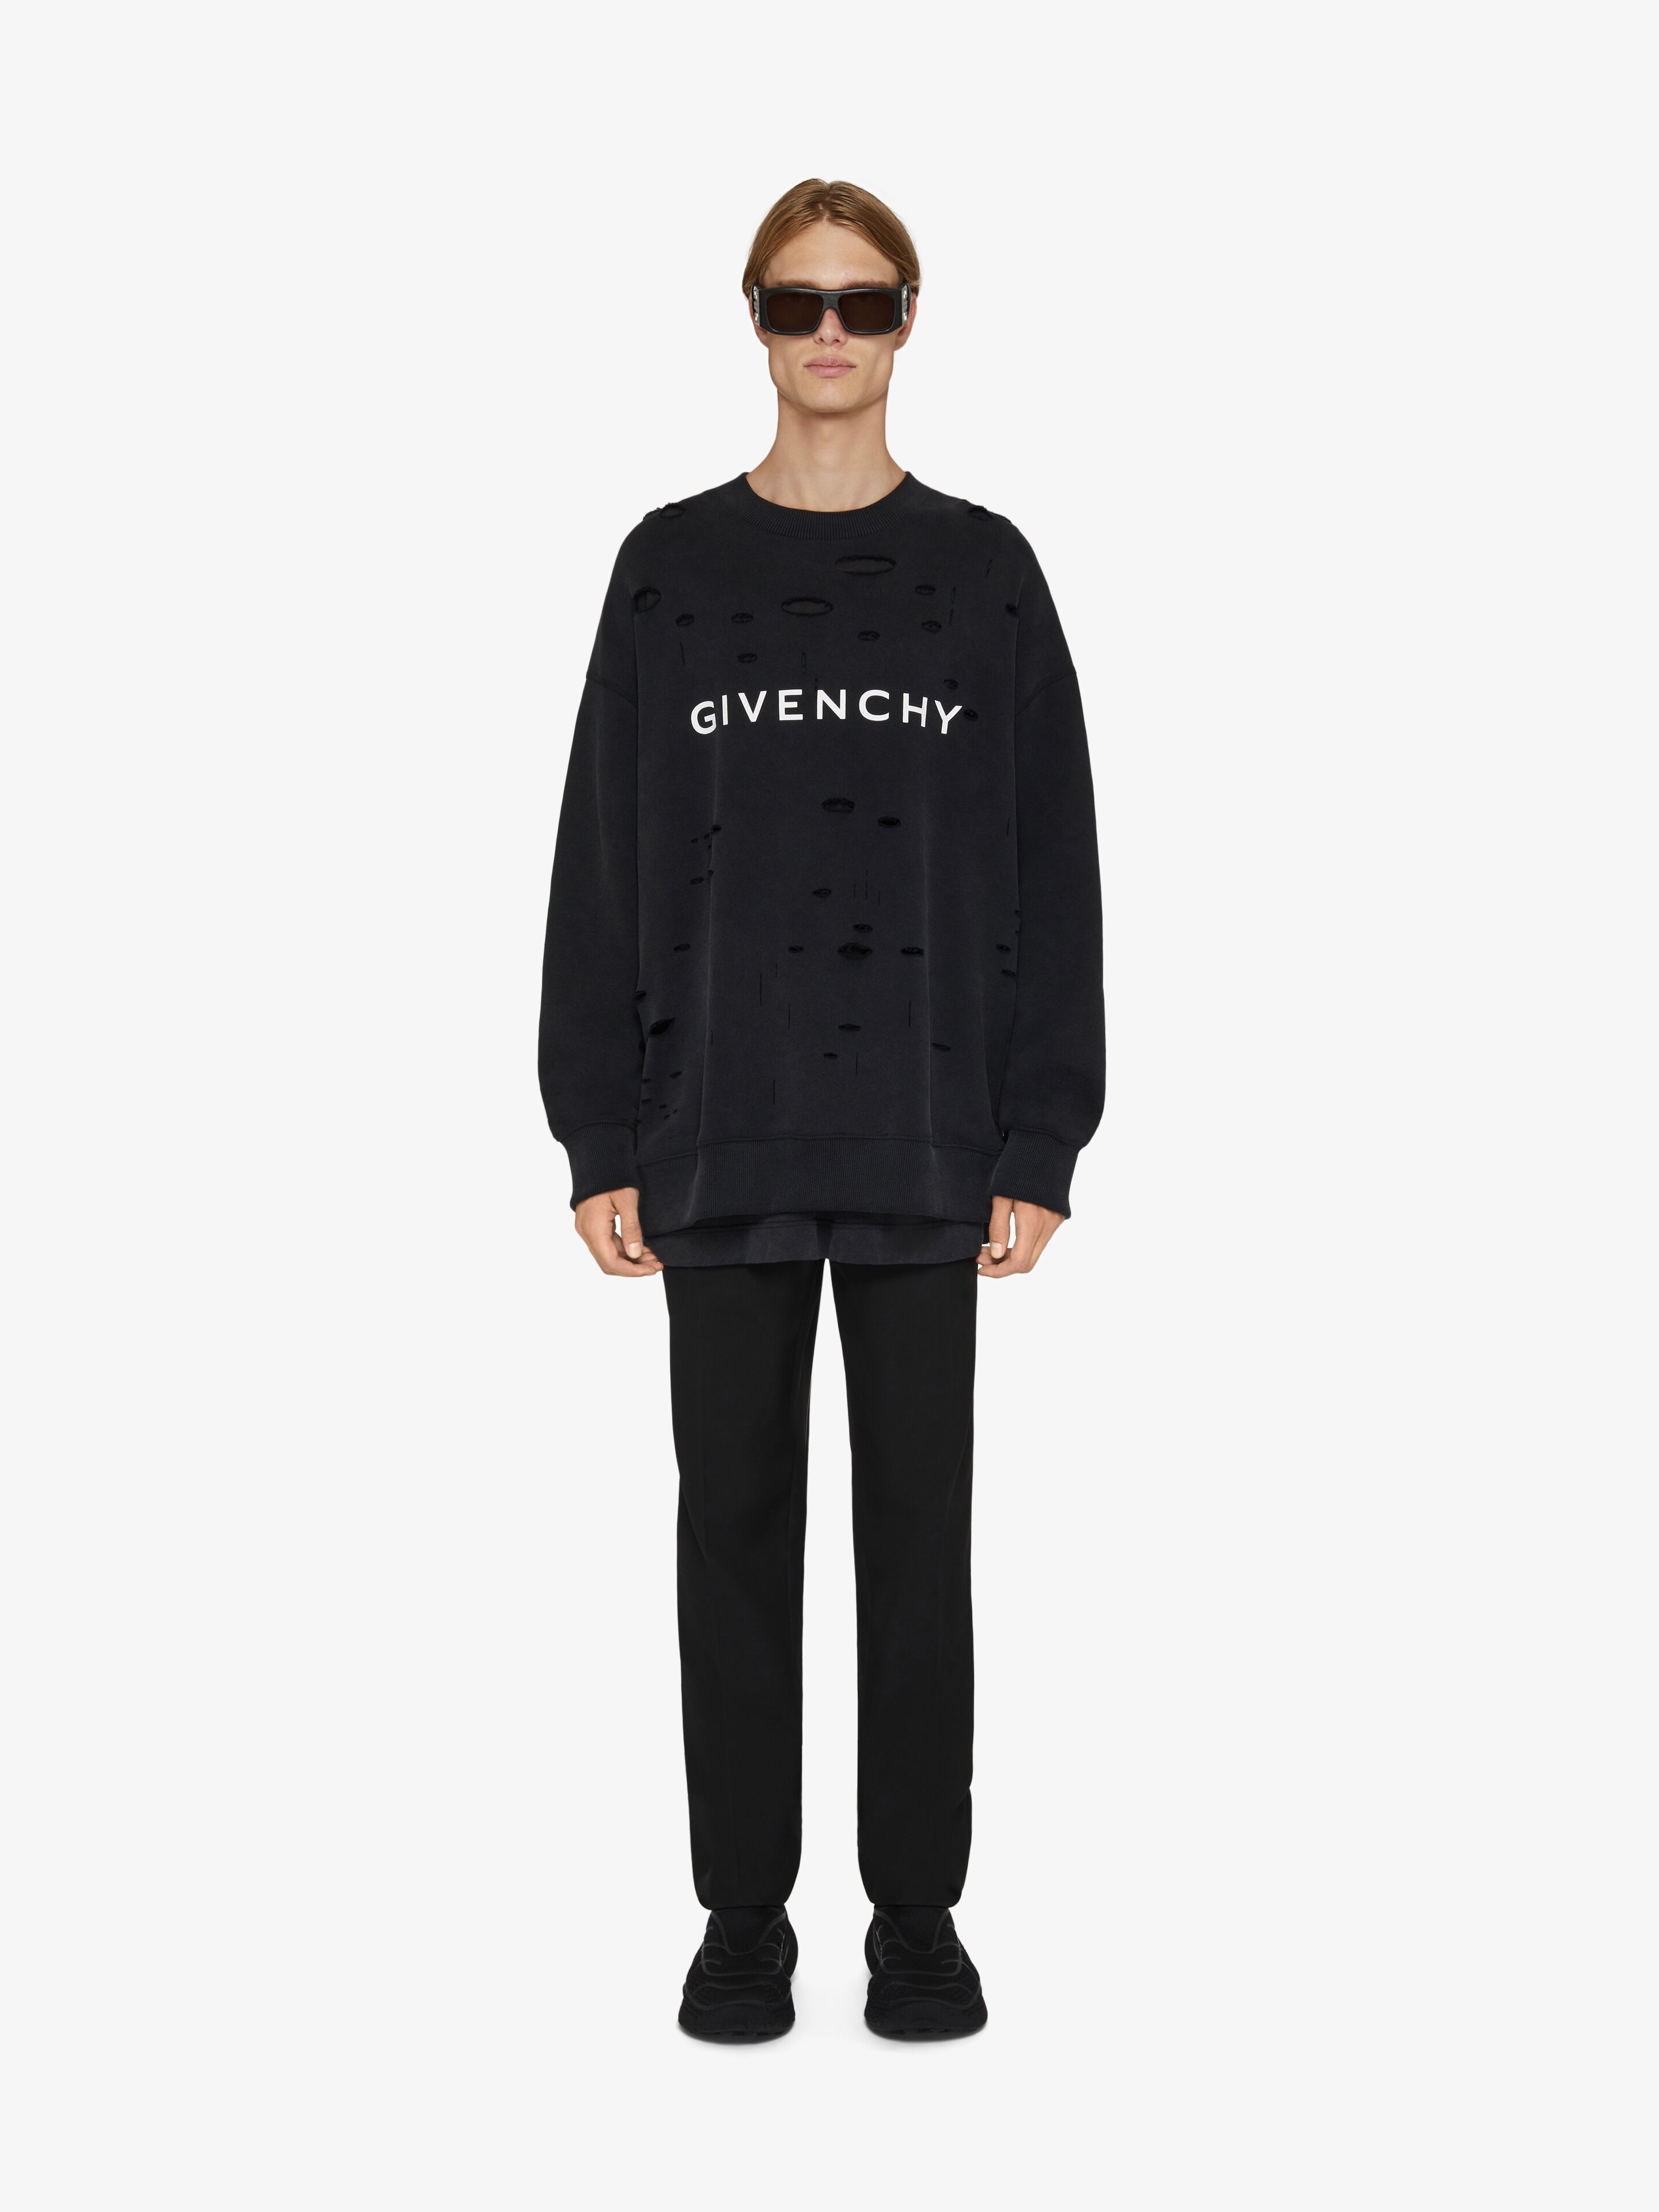 GIVENCHY ARCHETYPE SWEATSHIRT WITH DESTROYED EFFECT - 2